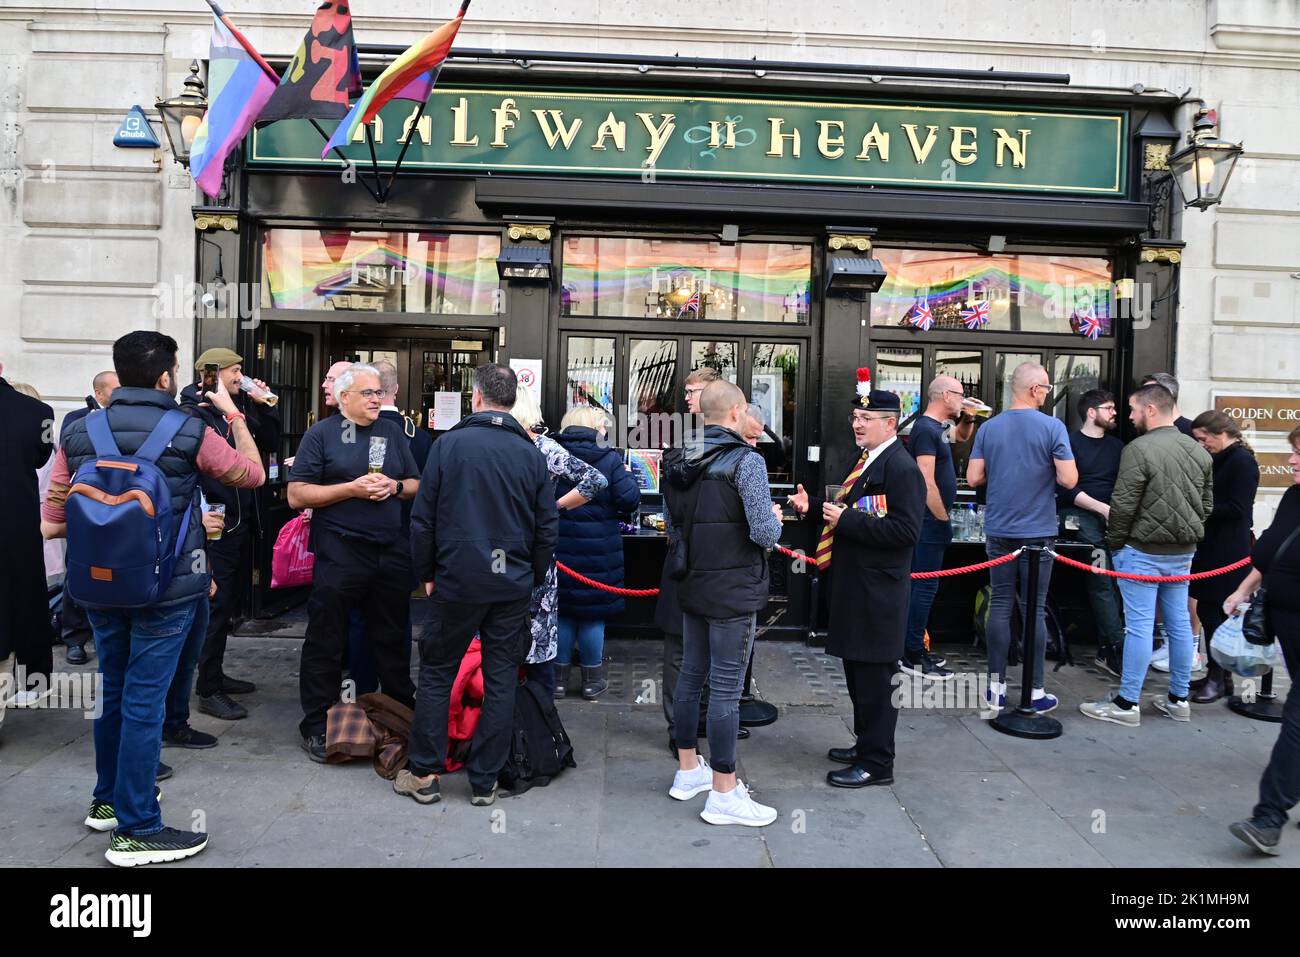 State funeral of Her Majesty Queen Elizabeth II, London, UK, Monday 19th September 2022. Drinkers in the Halfway II Heaven pub after the event. Stock Photo